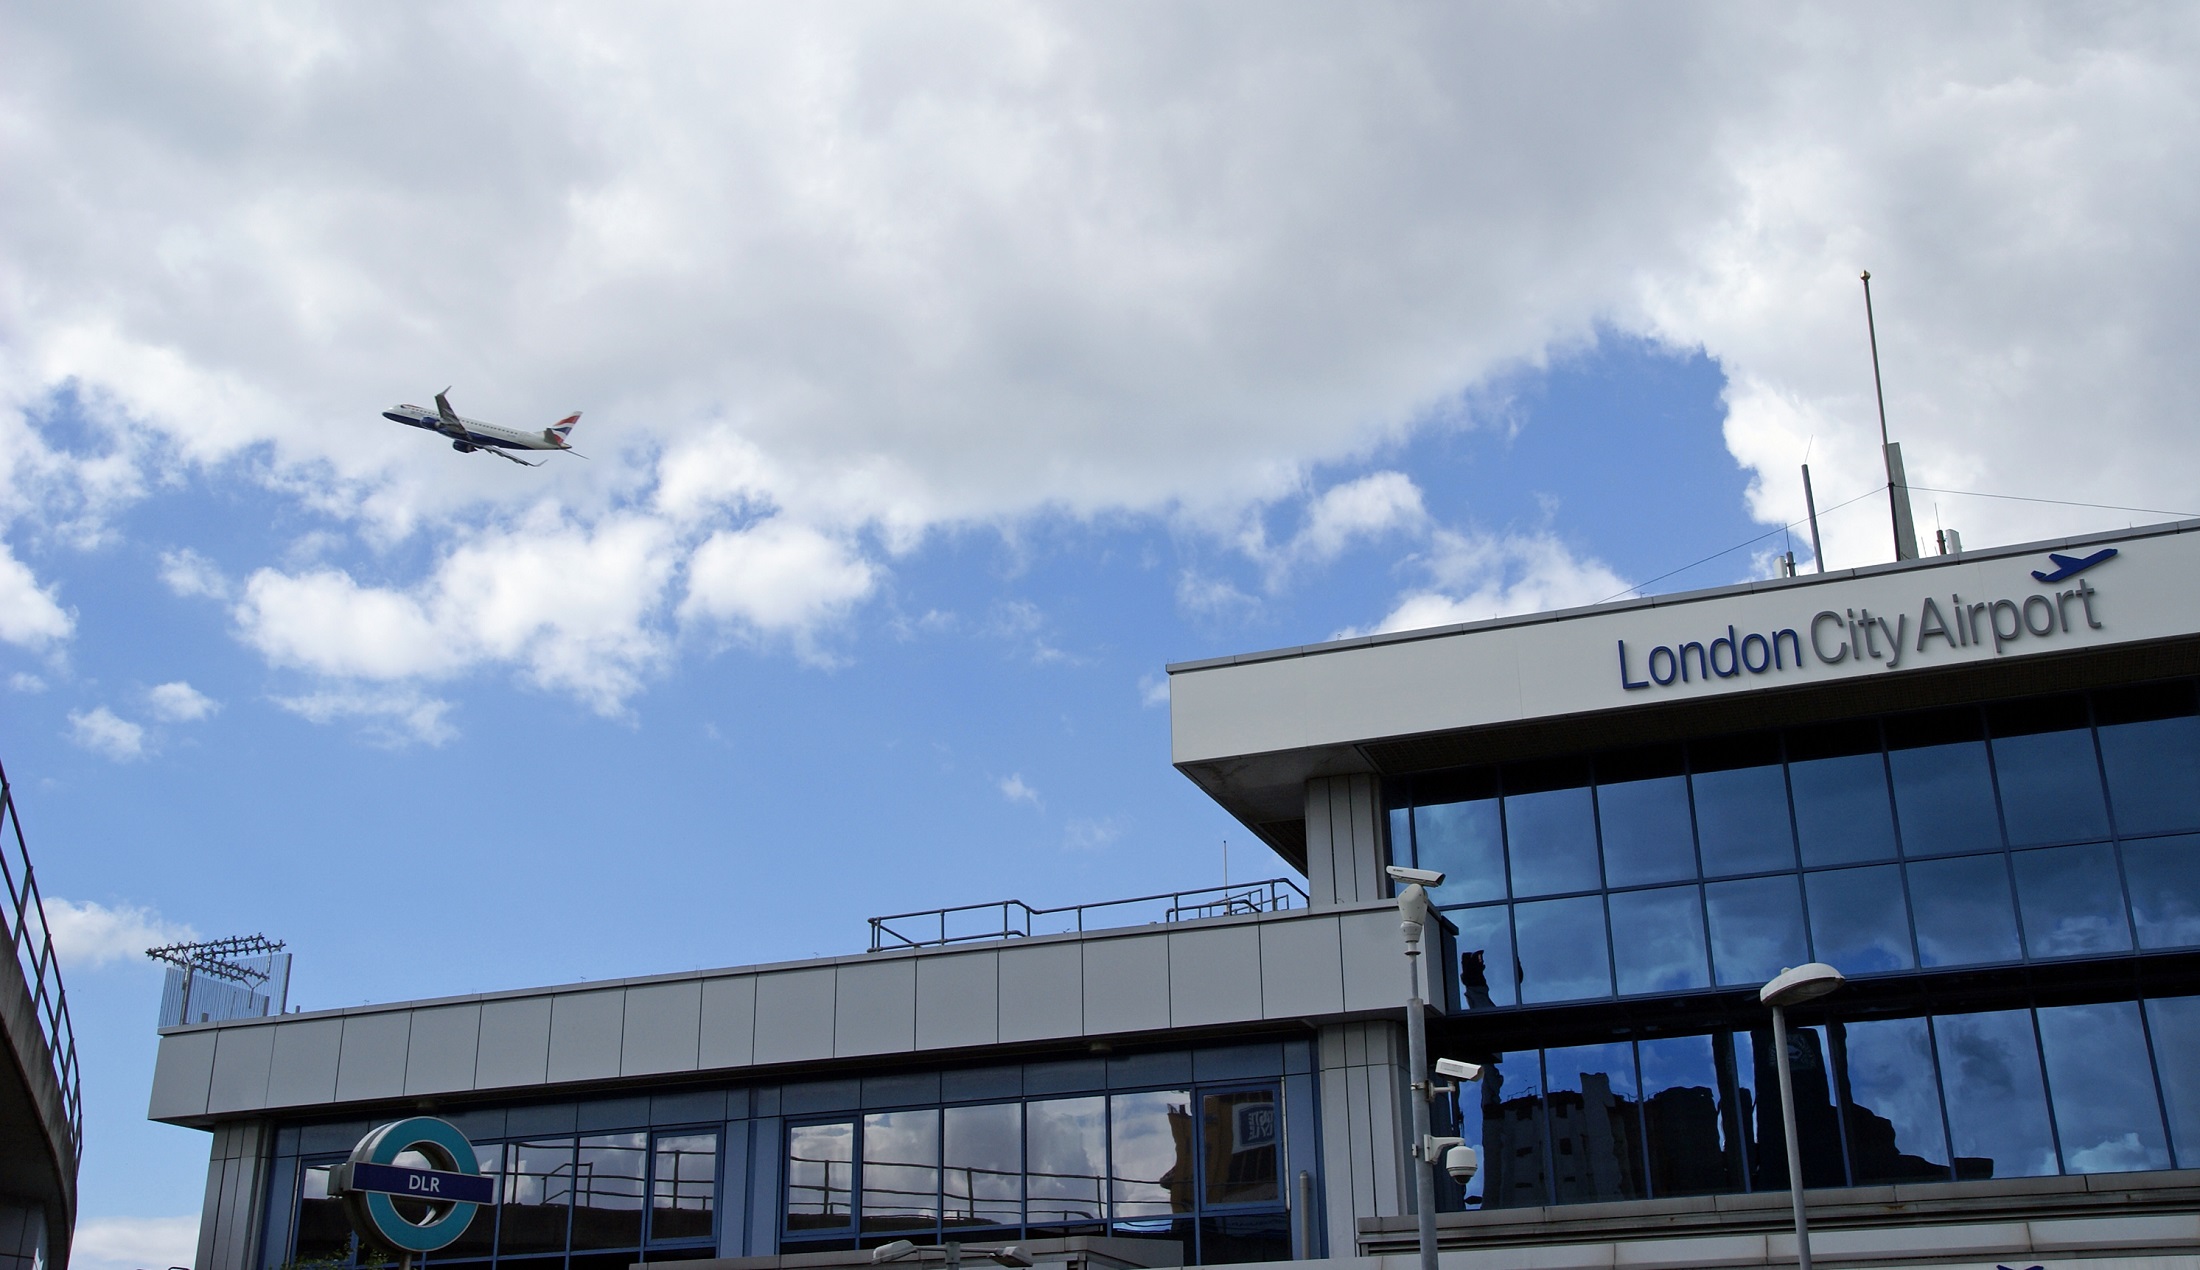 London City Airport Starts Public Consultation to Handle Rising Demand